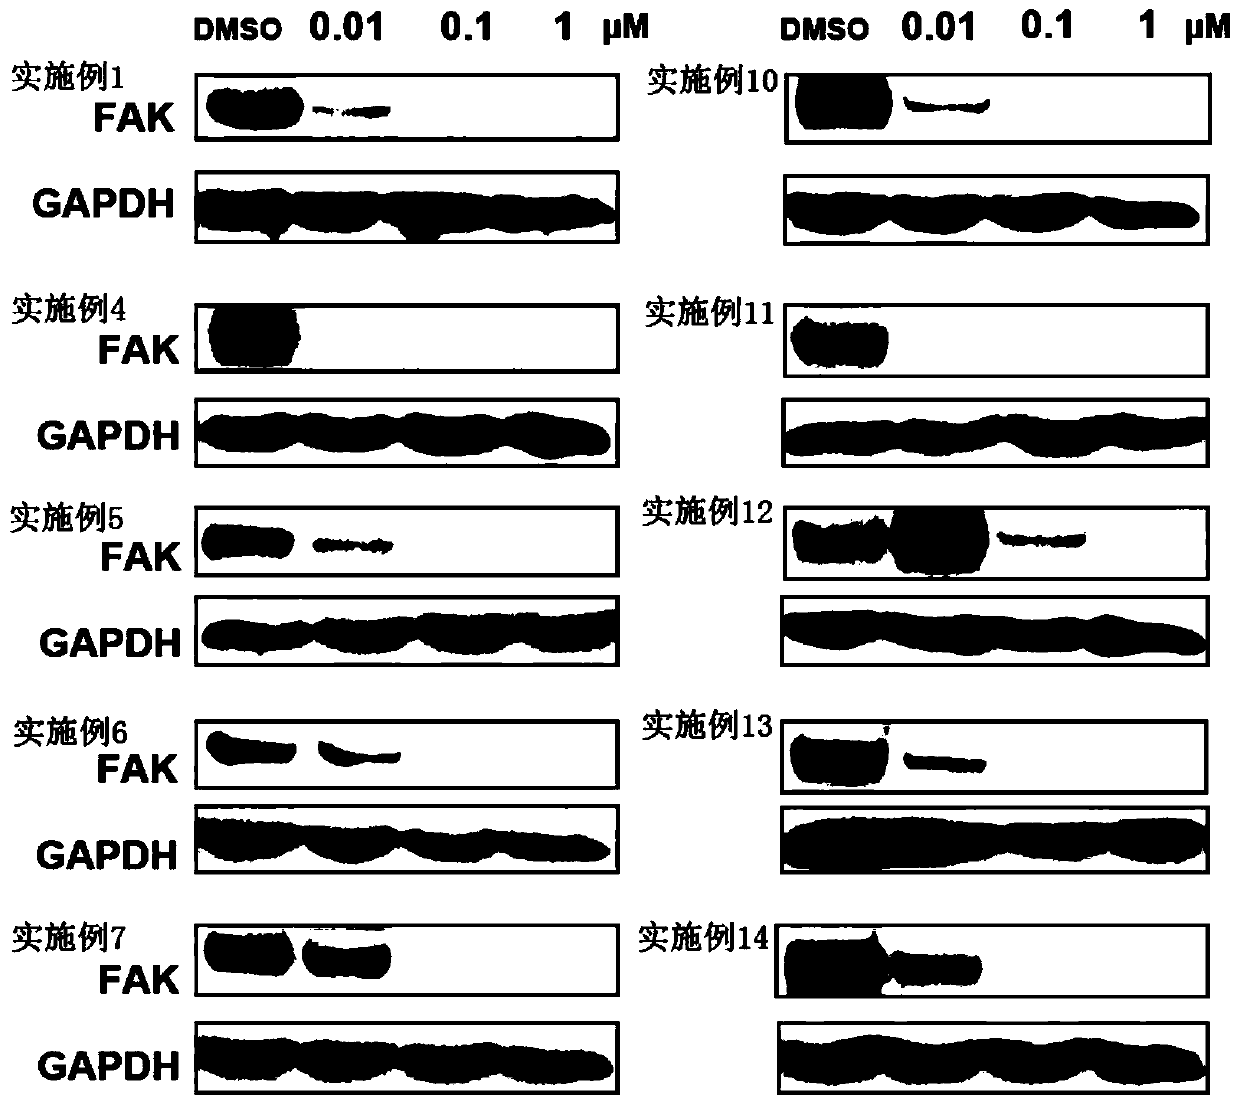 Compounds for targeted degradation of focal adhesion kinase and application of the compounds in medicine